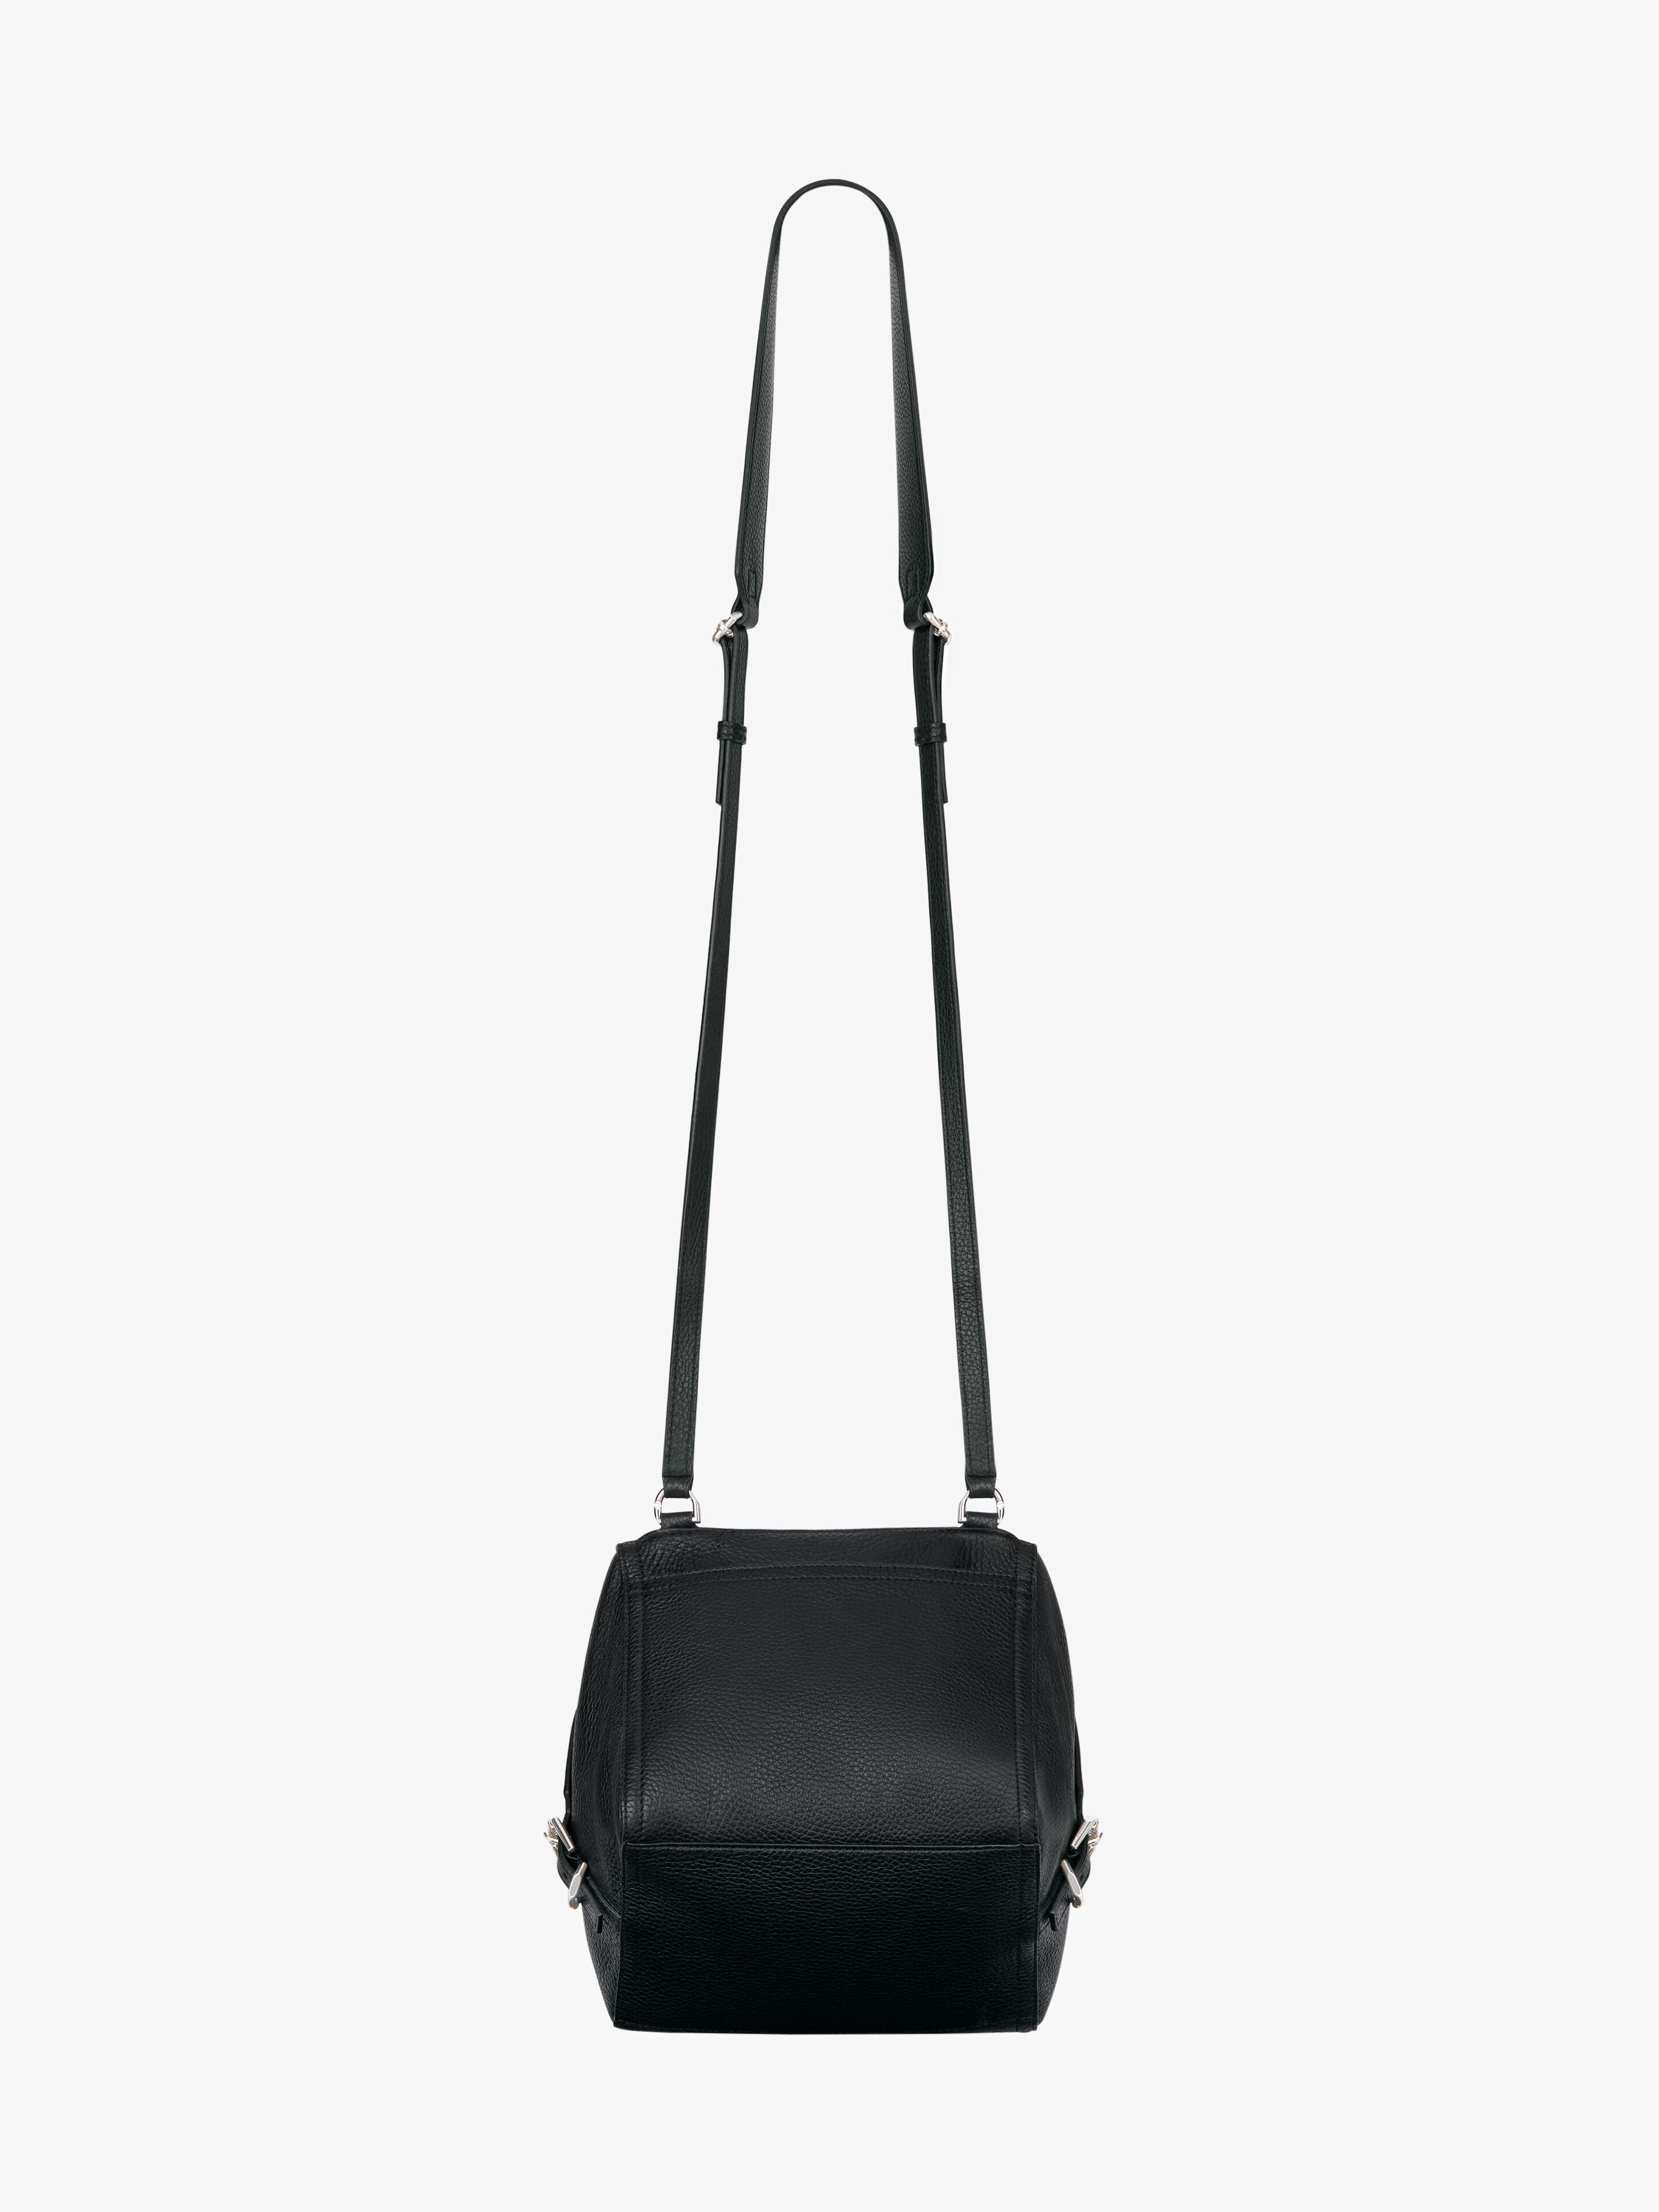 SMALL PANDORA BAG IN GRAINED LEATHER - 4